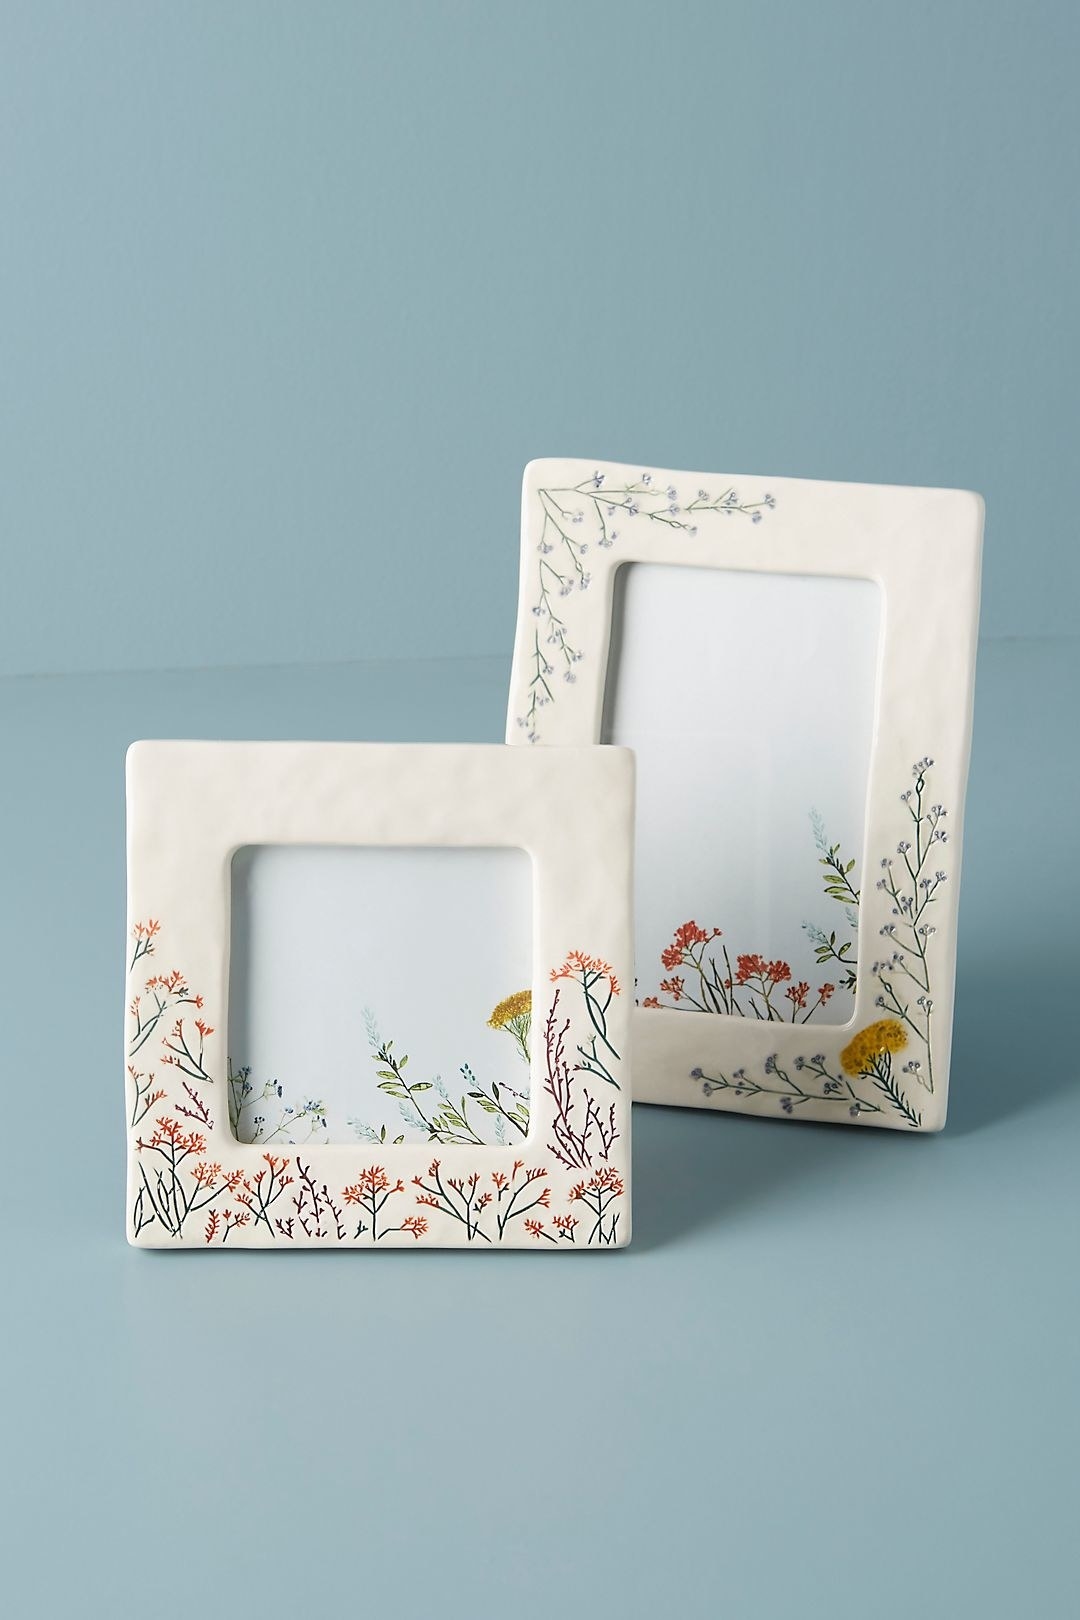 white ceramic picture frames with carved and painted small flowers on them